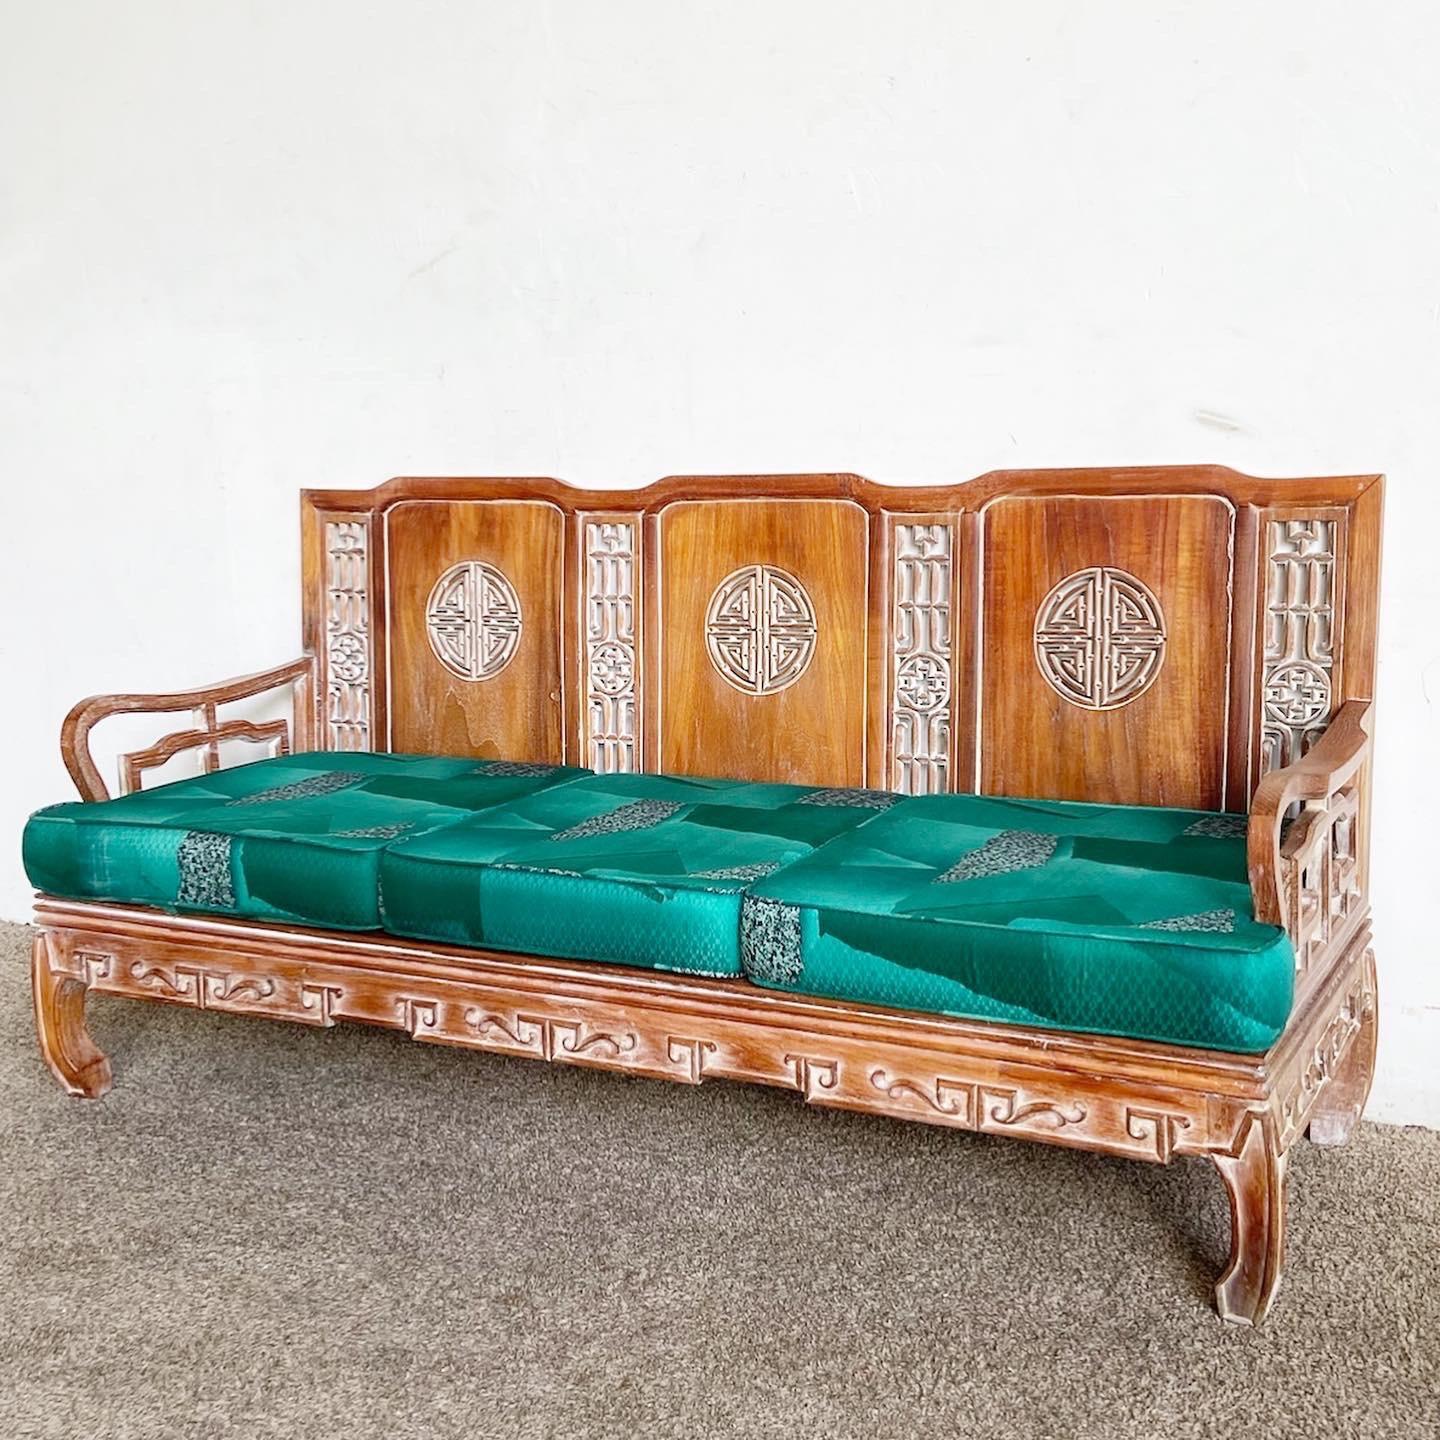 Experience the artistry of Asian design with this Ming Style Carved Wooden Sofa and armchair set. The furniture pieces feature intricate carvings on the back, sides, and armrests, offering both comfort and a touch of historical cultural